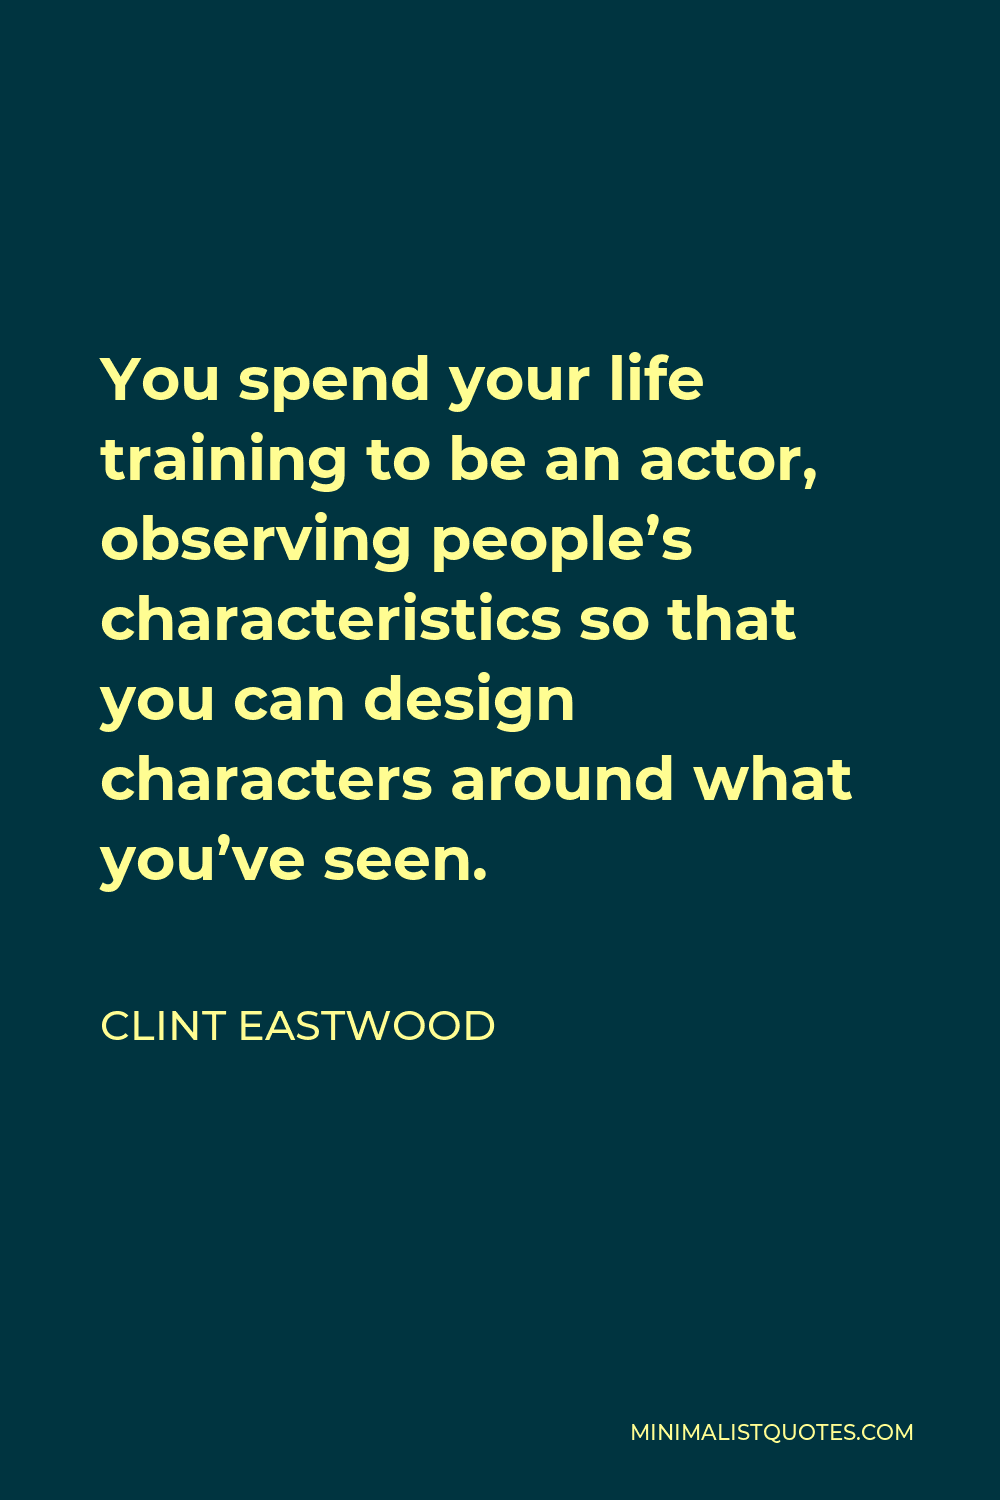 Clint Eastwood Quote - You spend your life training to be an actor, observing people’s characteristics so that you can design characters around what you’ve seen.